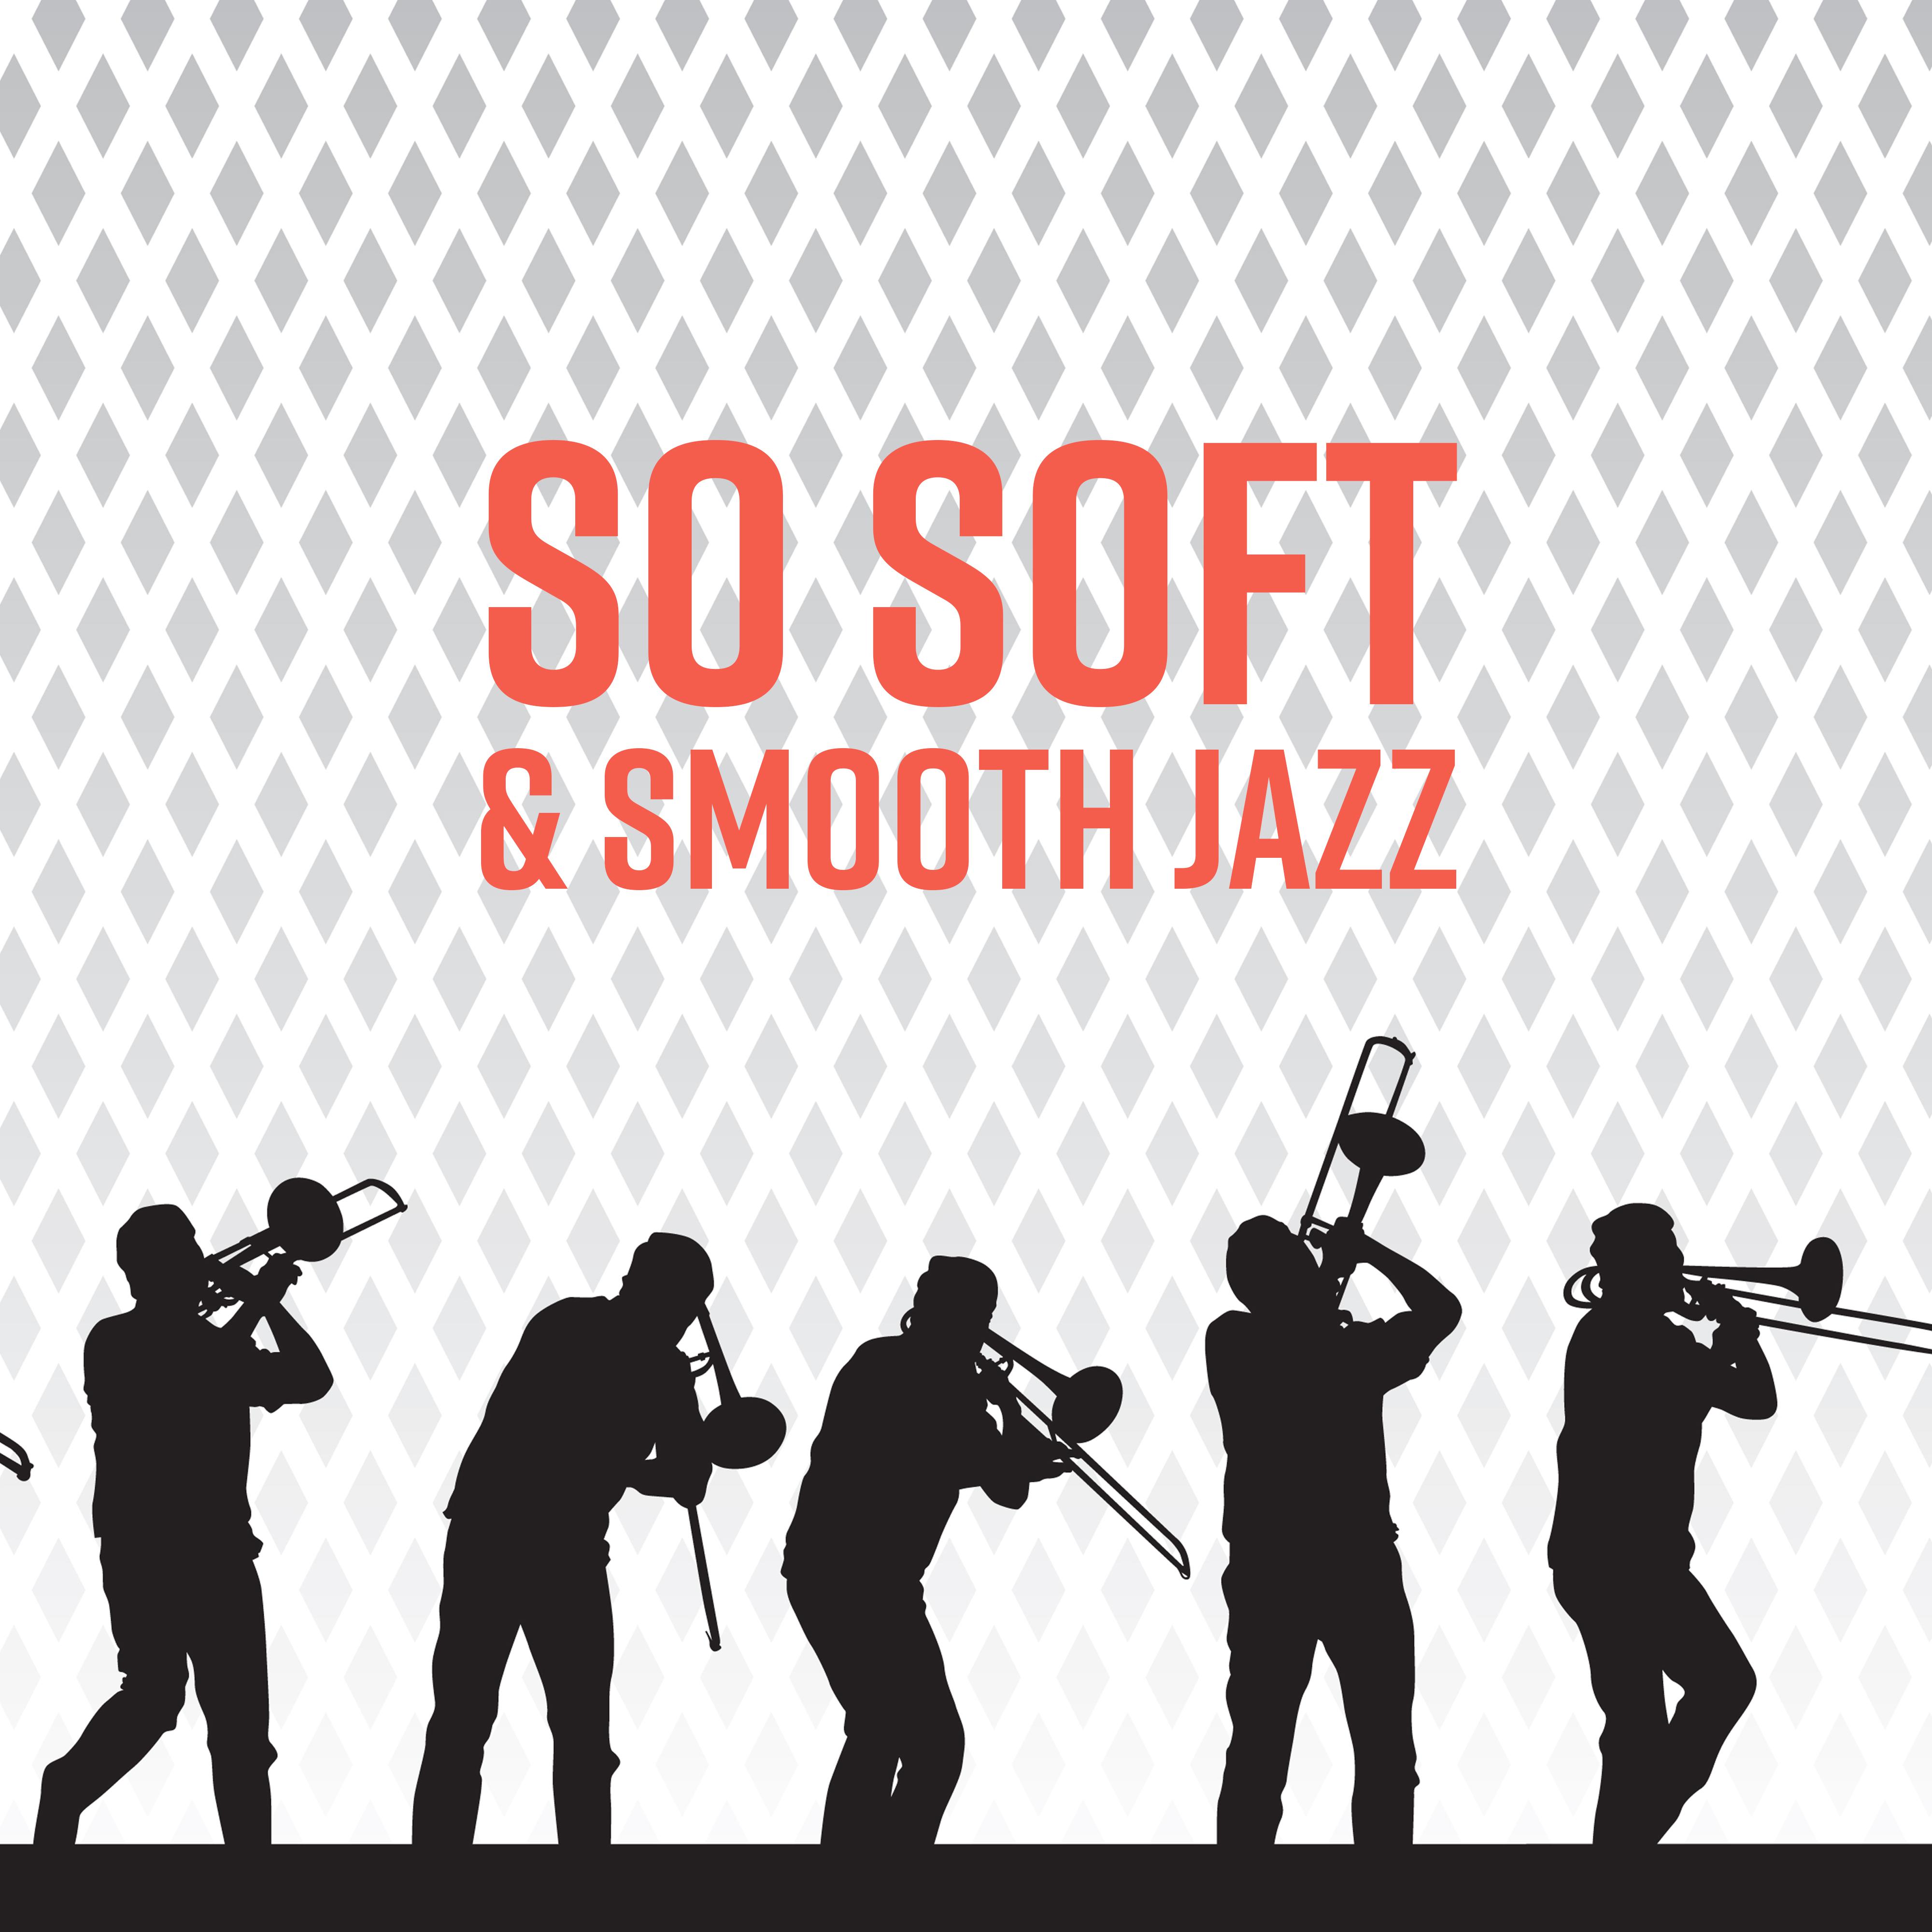 So Soft & Smooth Jazz: Compilation of Best 2019 Instrumental Jazz Music, Vintage Sounds of Piano, Trumpet & Other